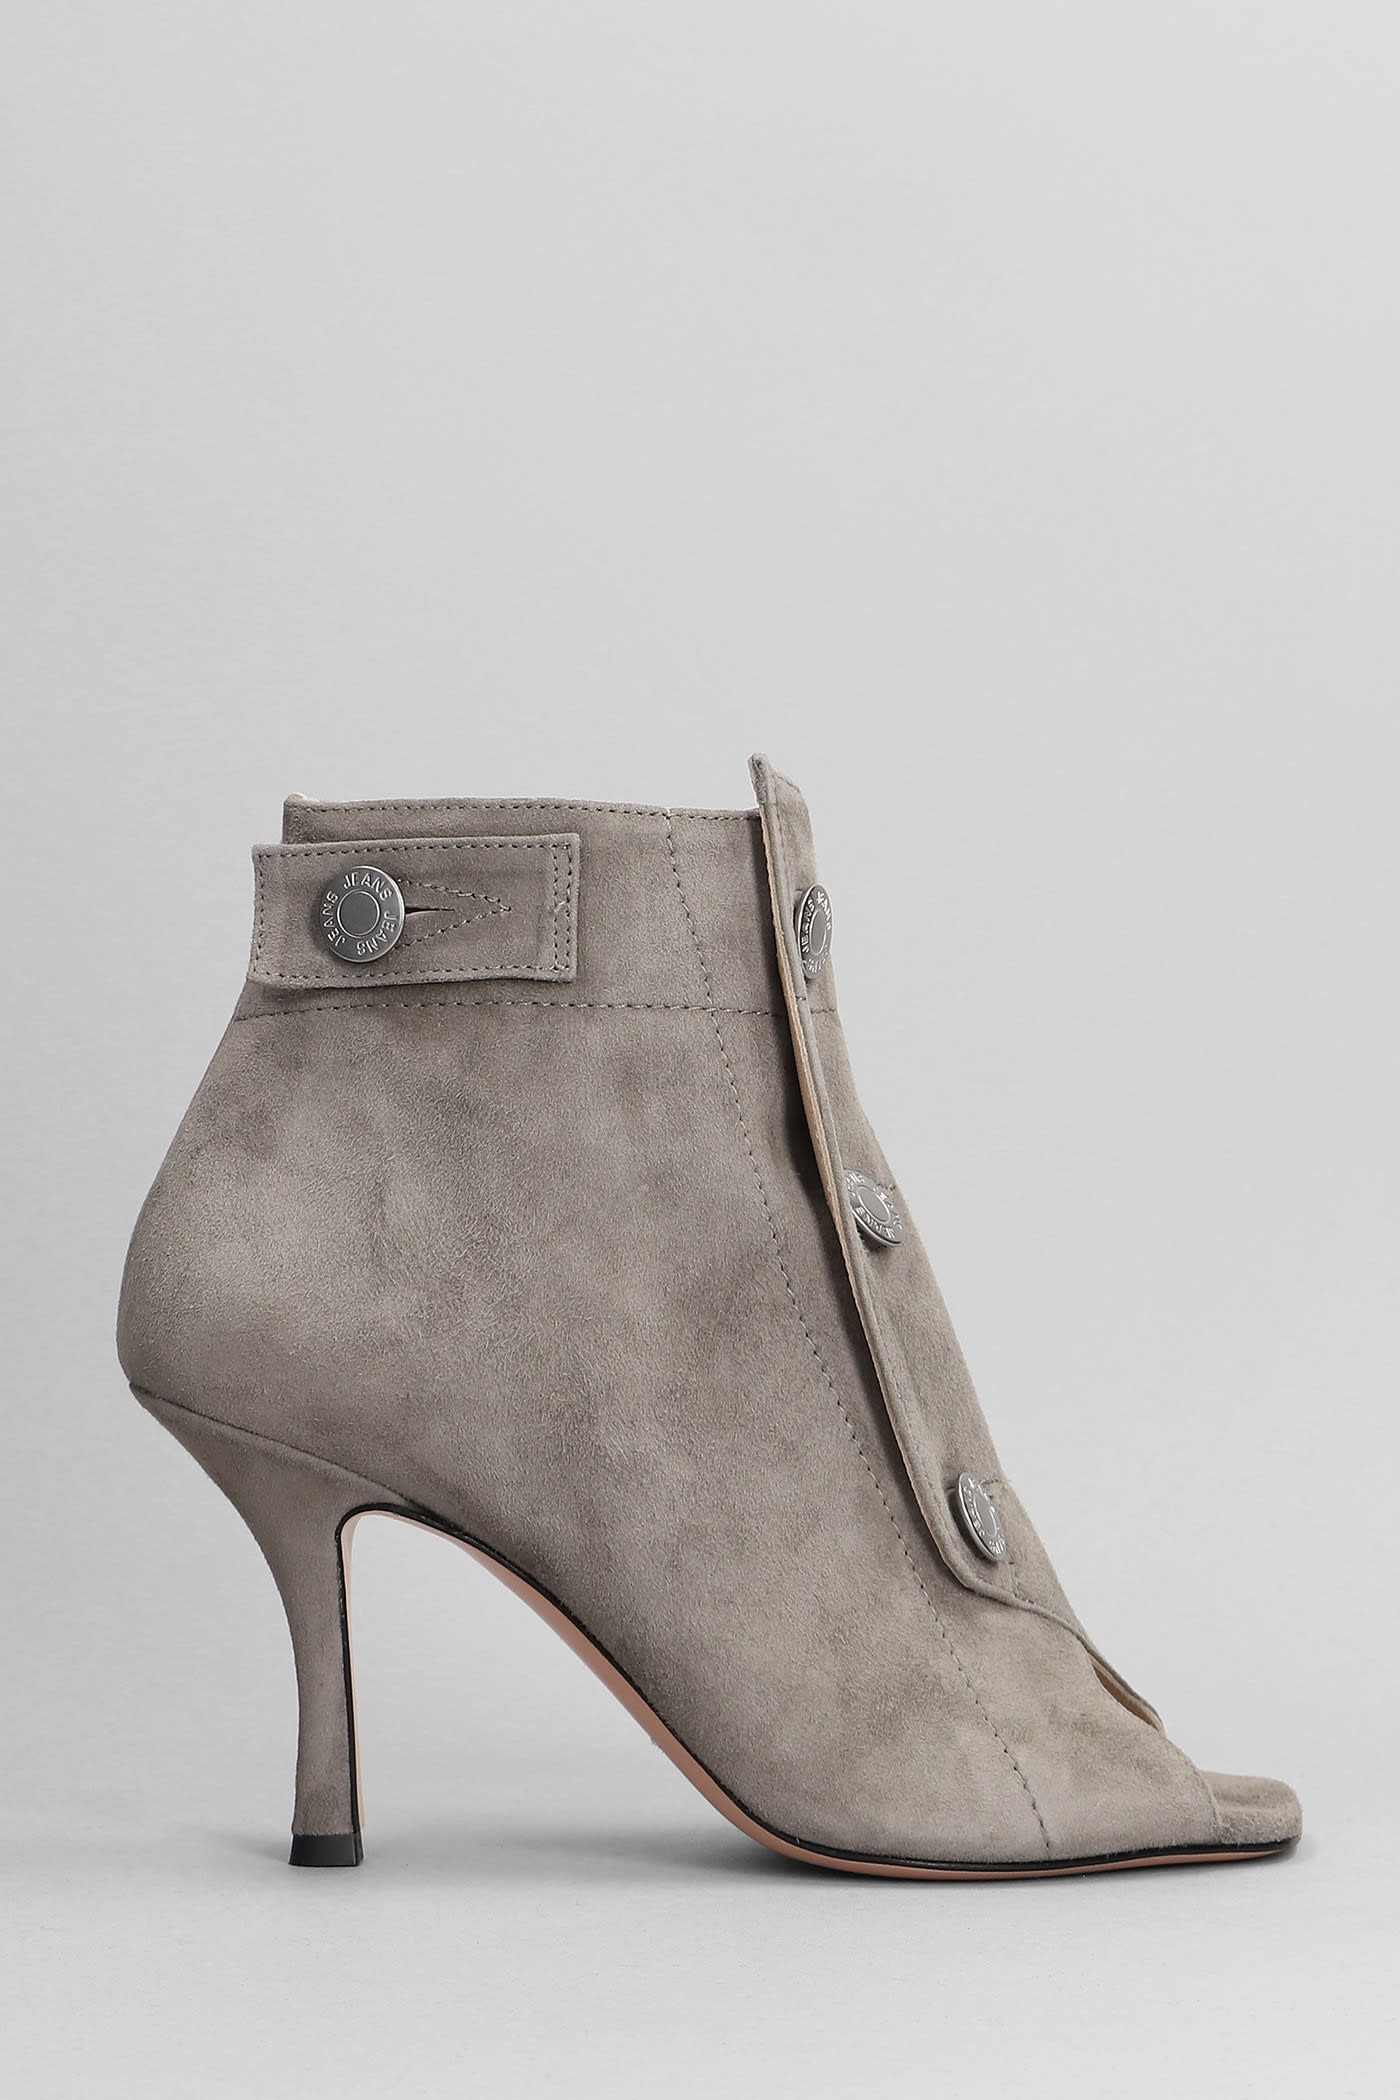 High Heels Ankle Boots In Grey Suede